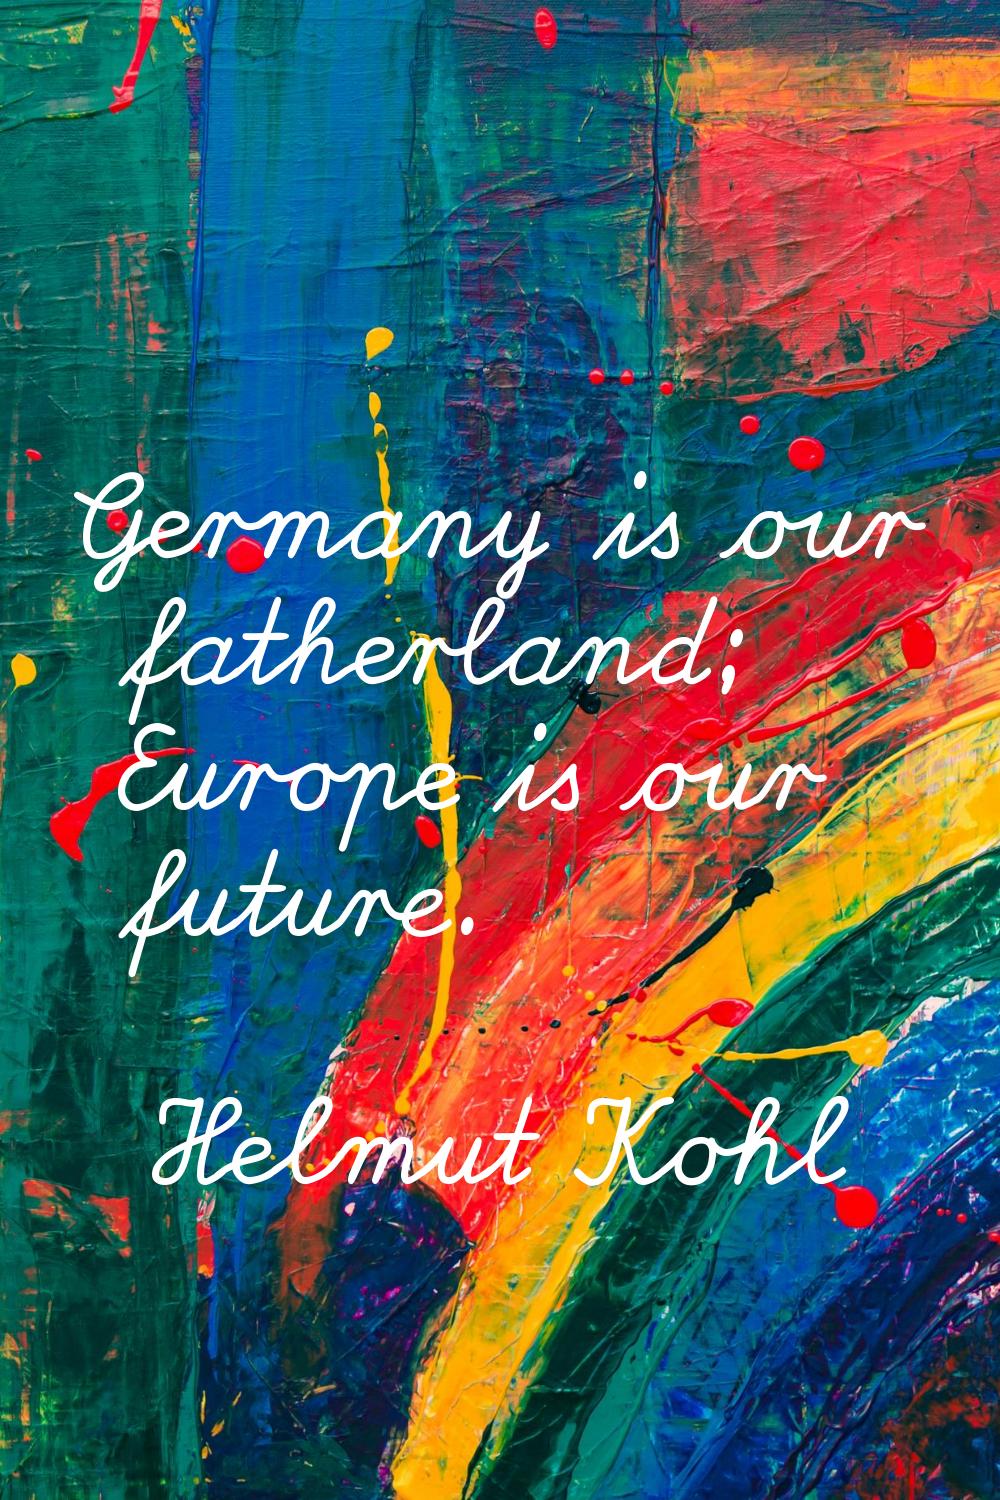 Germany is our fatherland; Europe is our future.